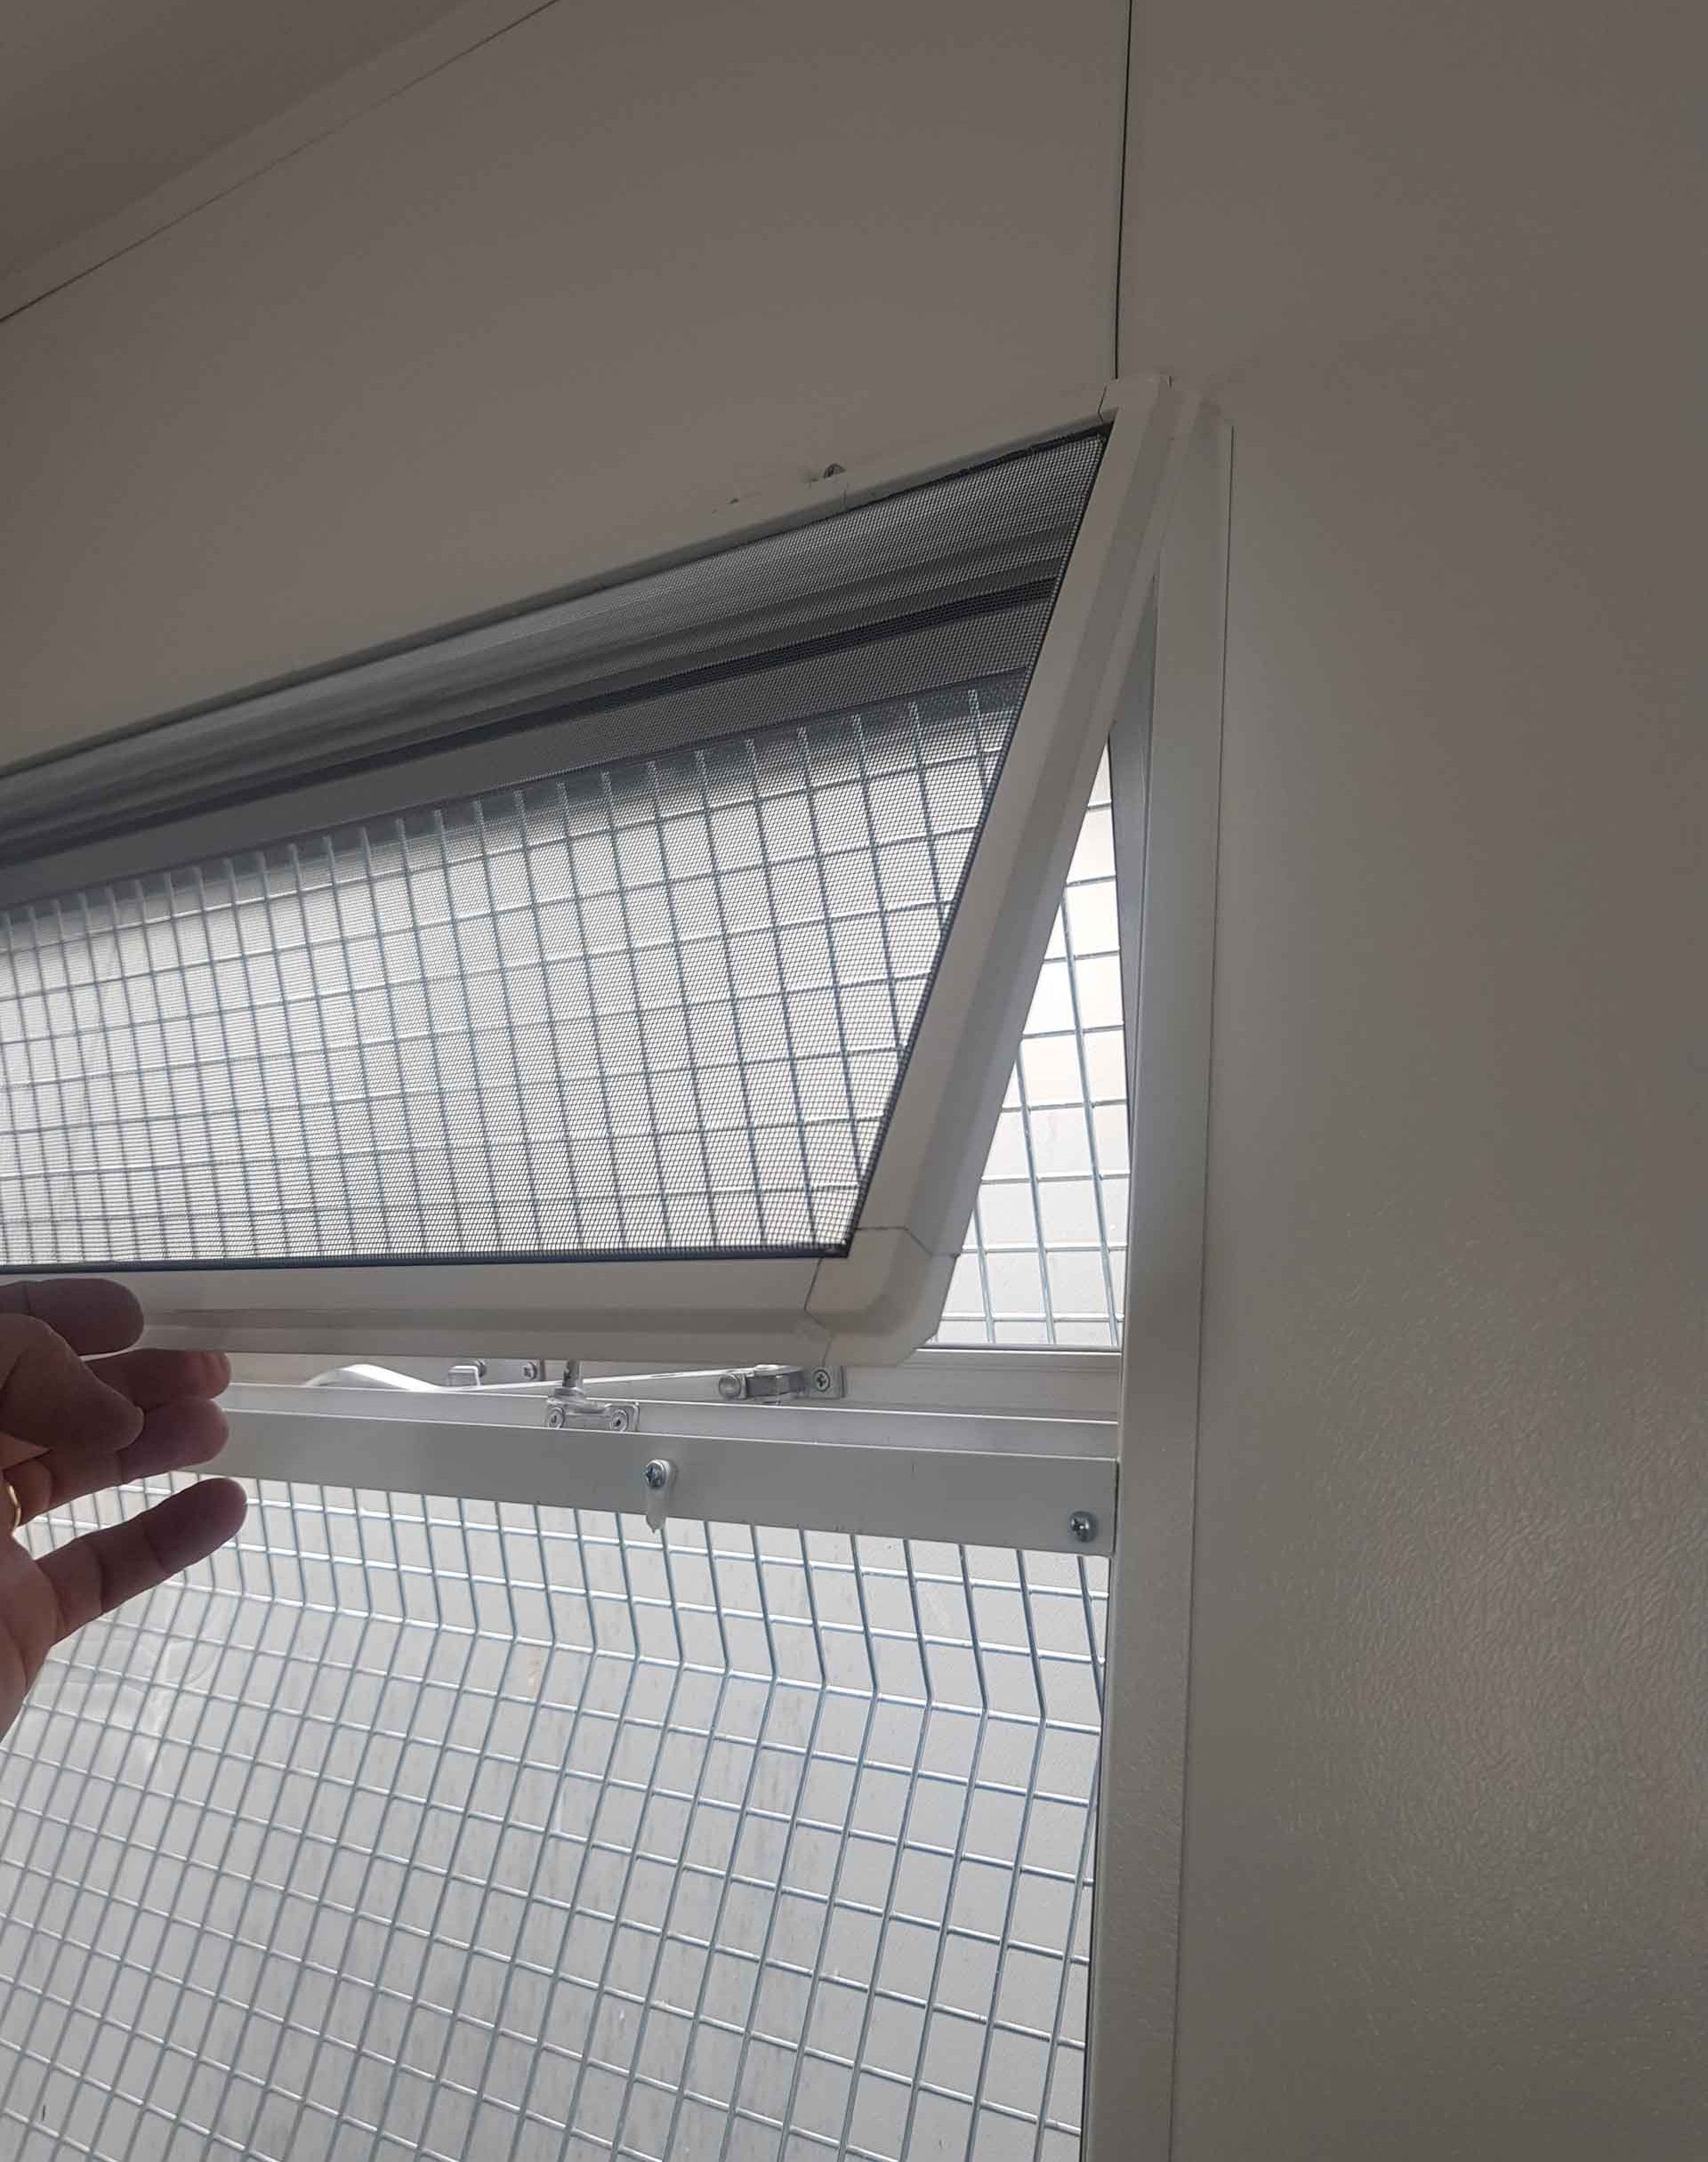 fly screen installed on the inside of a window frame